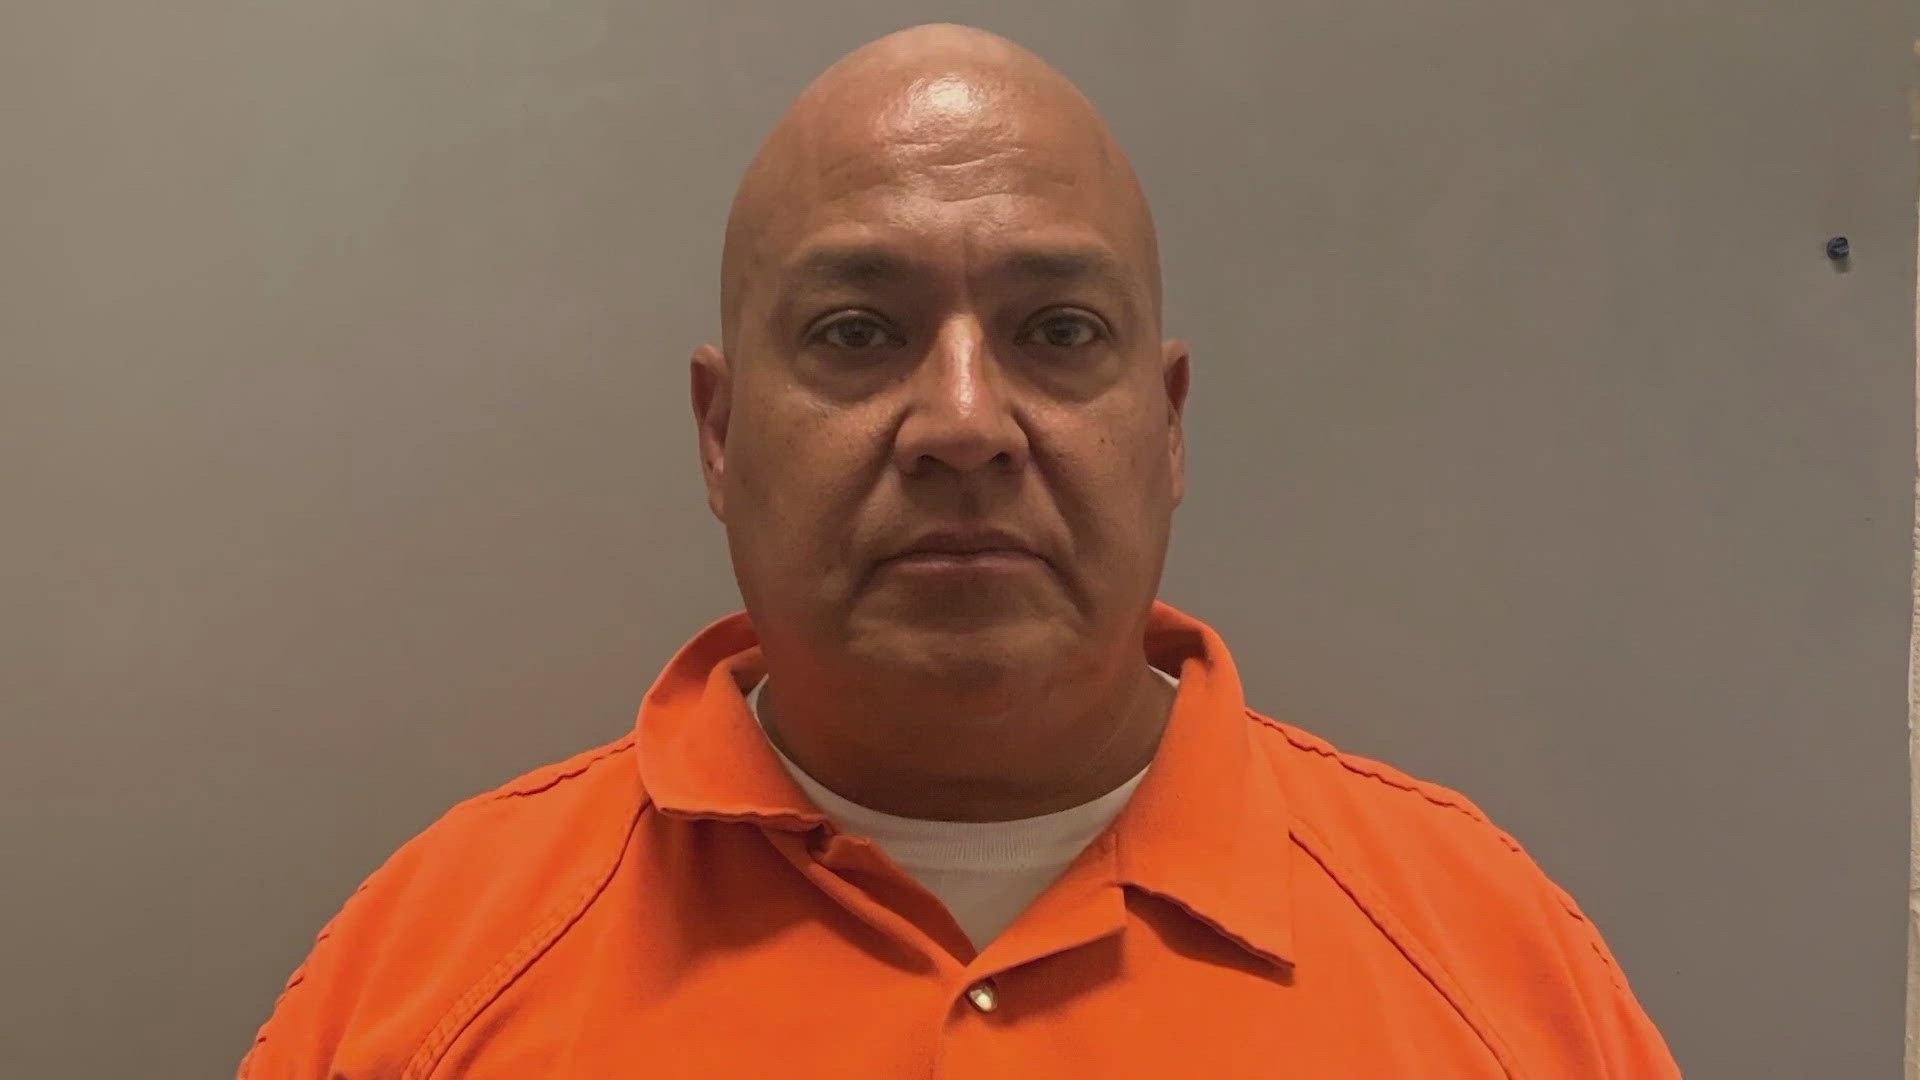 Indictments released against Uvalde CISD Police Chief, officer in response to Robb shooting